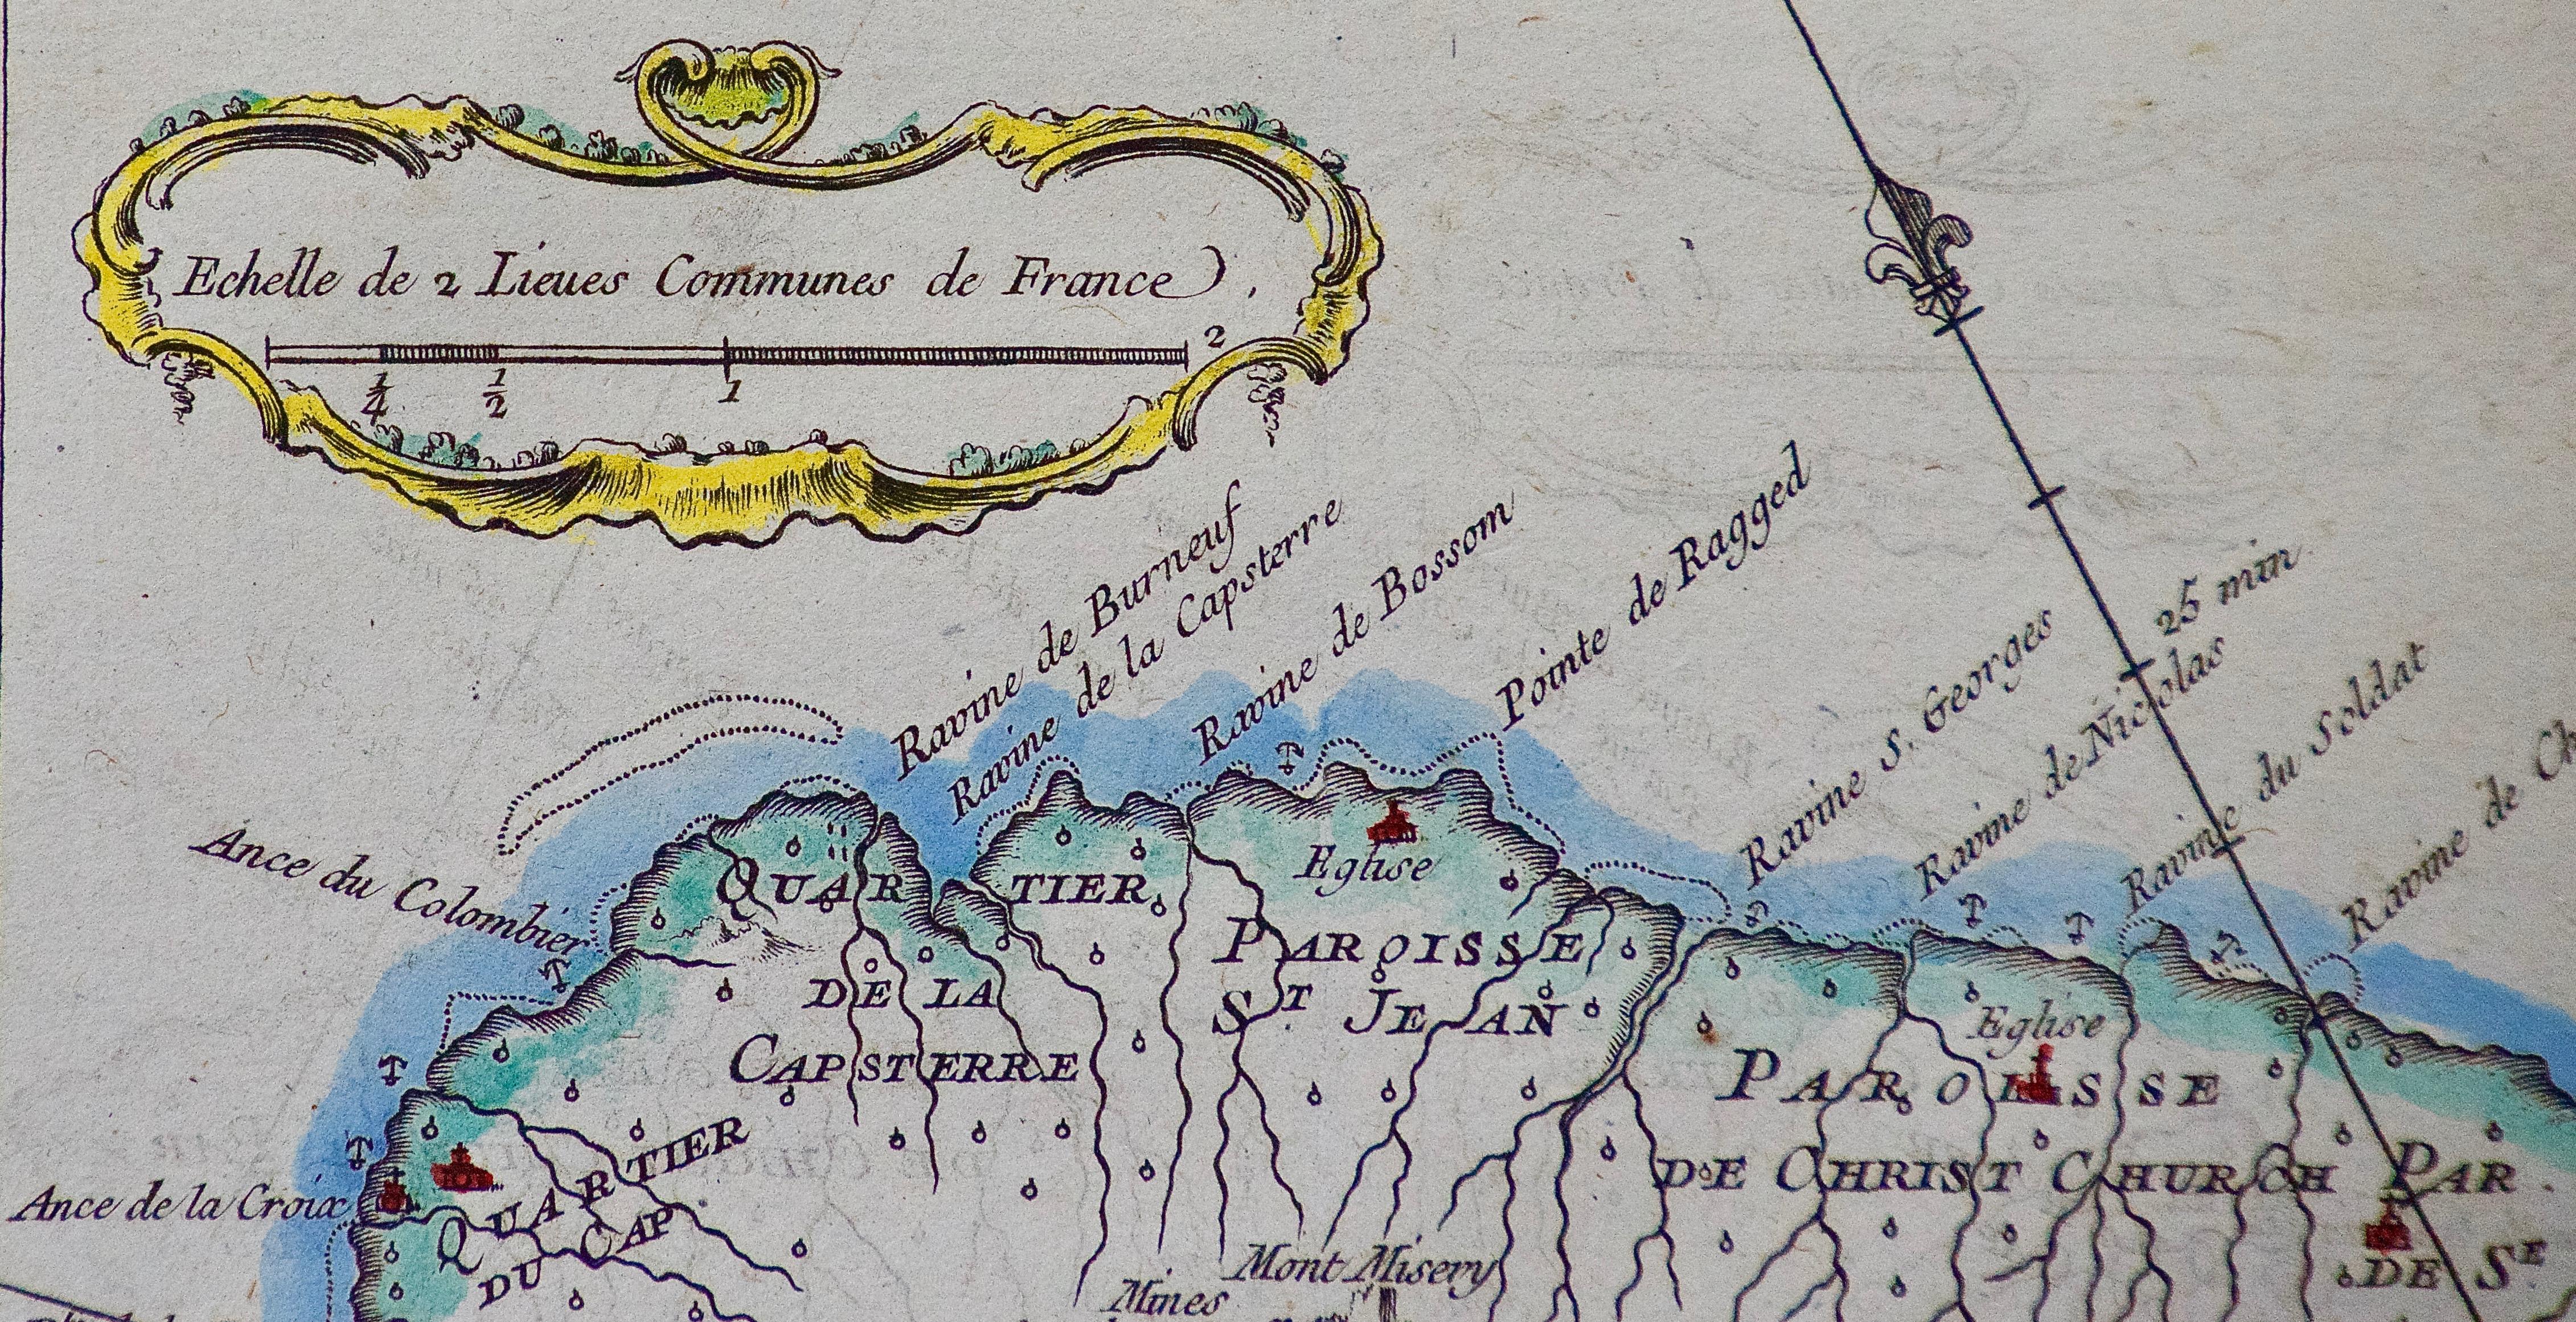 Jacques Bellin's hand colored copper plate map of the Caribbean island of Saint Kitts entitled 